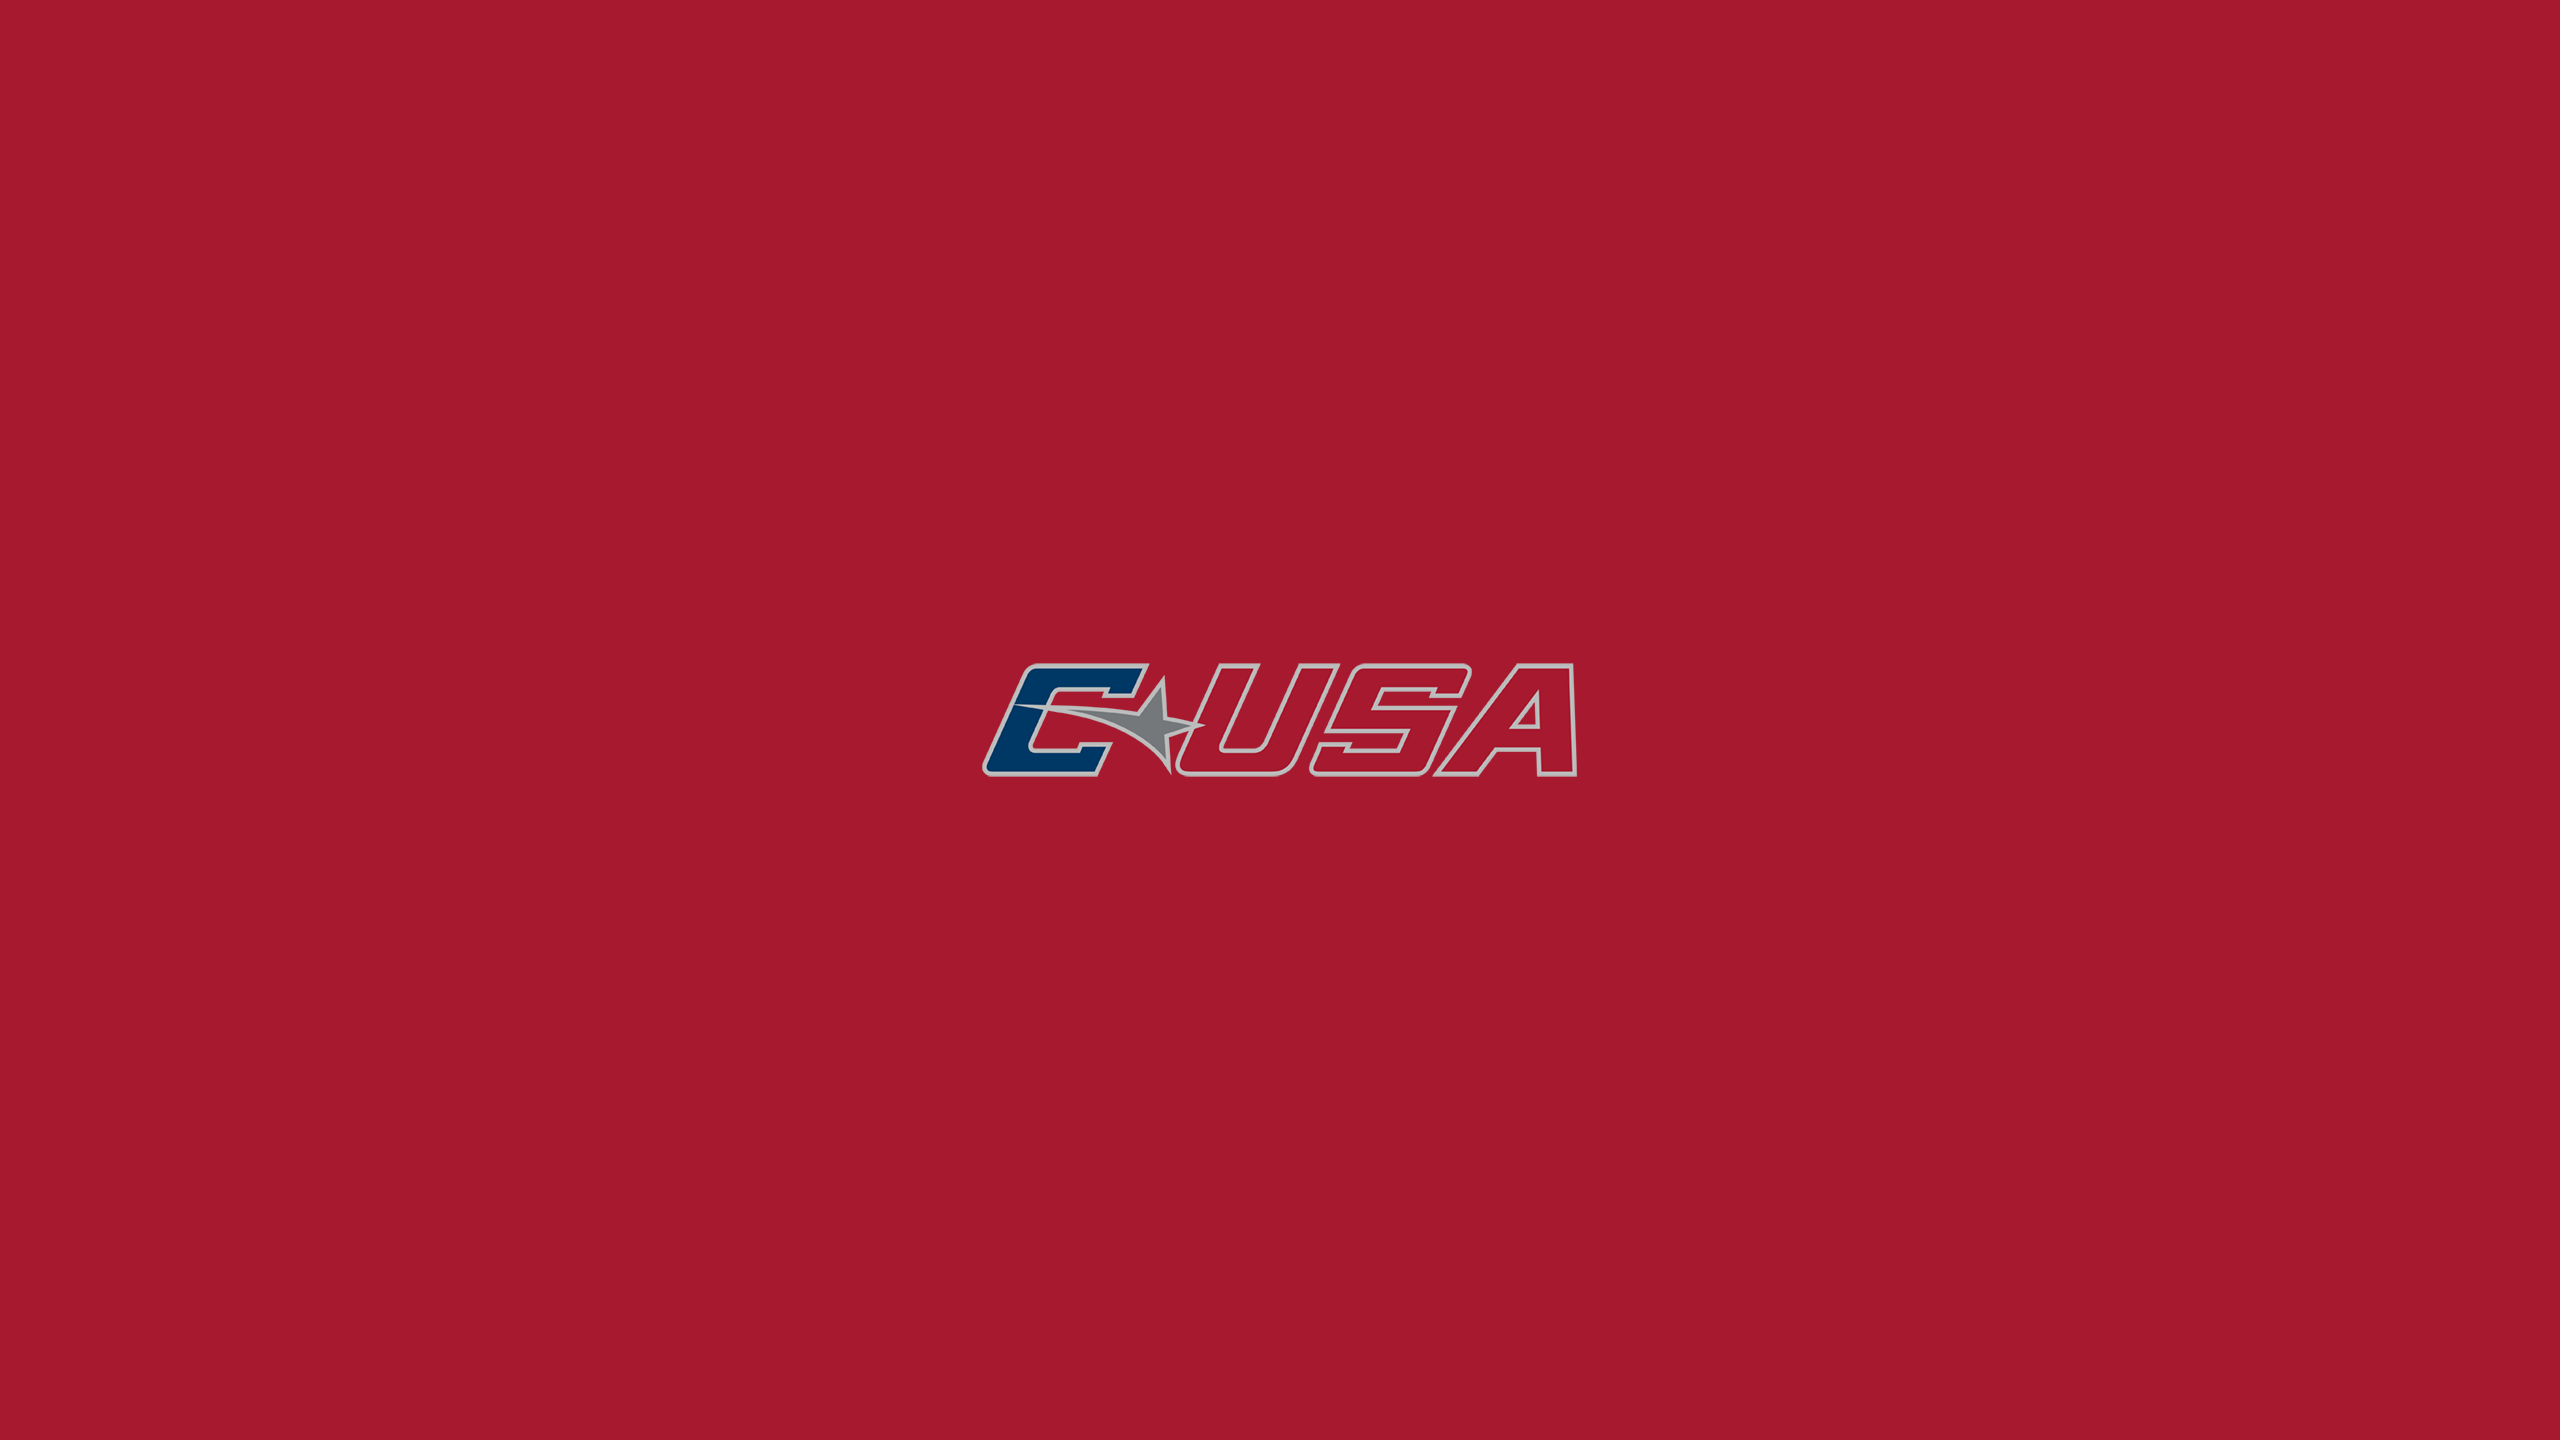 Conference USA Basketball - NCAAB - Square Bettor